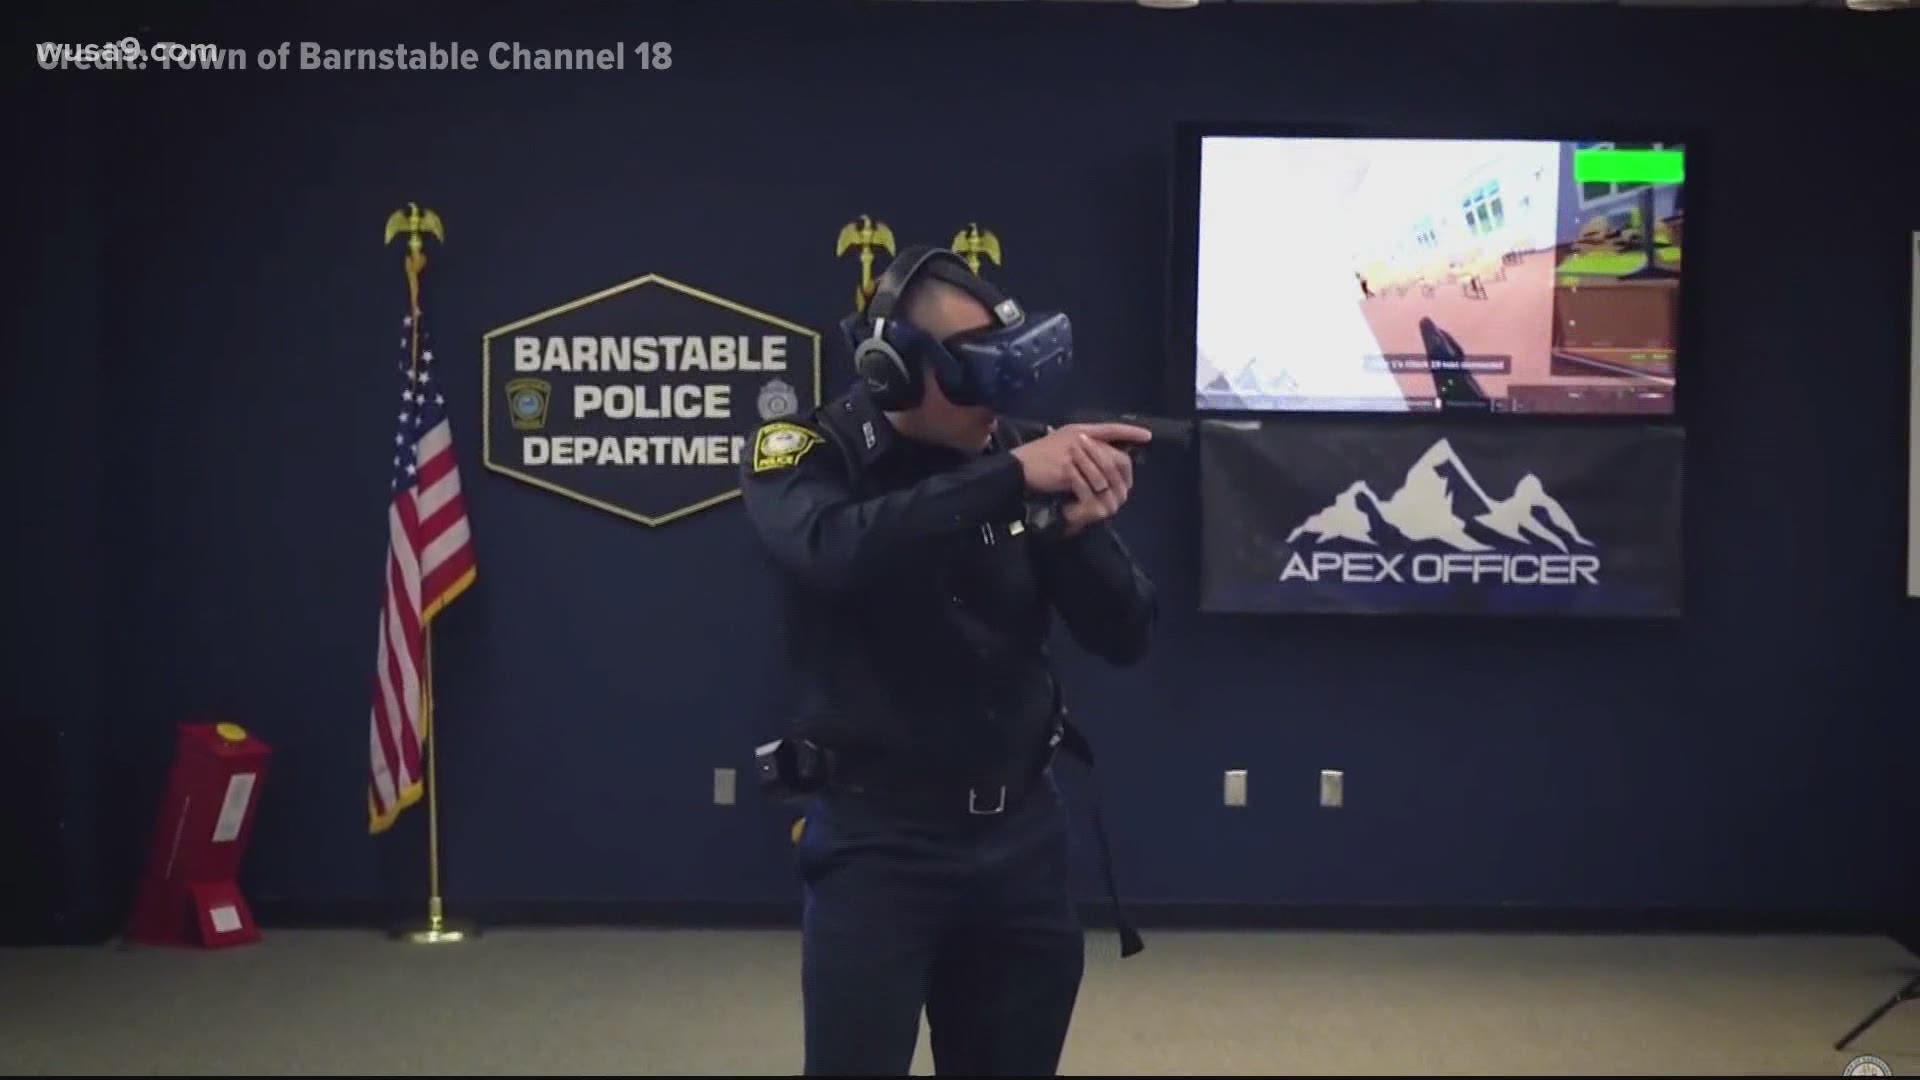 Barnstable police department partnered with Apex Officer, a virtual reality training platform, to train officers on different maneuvers and tactics